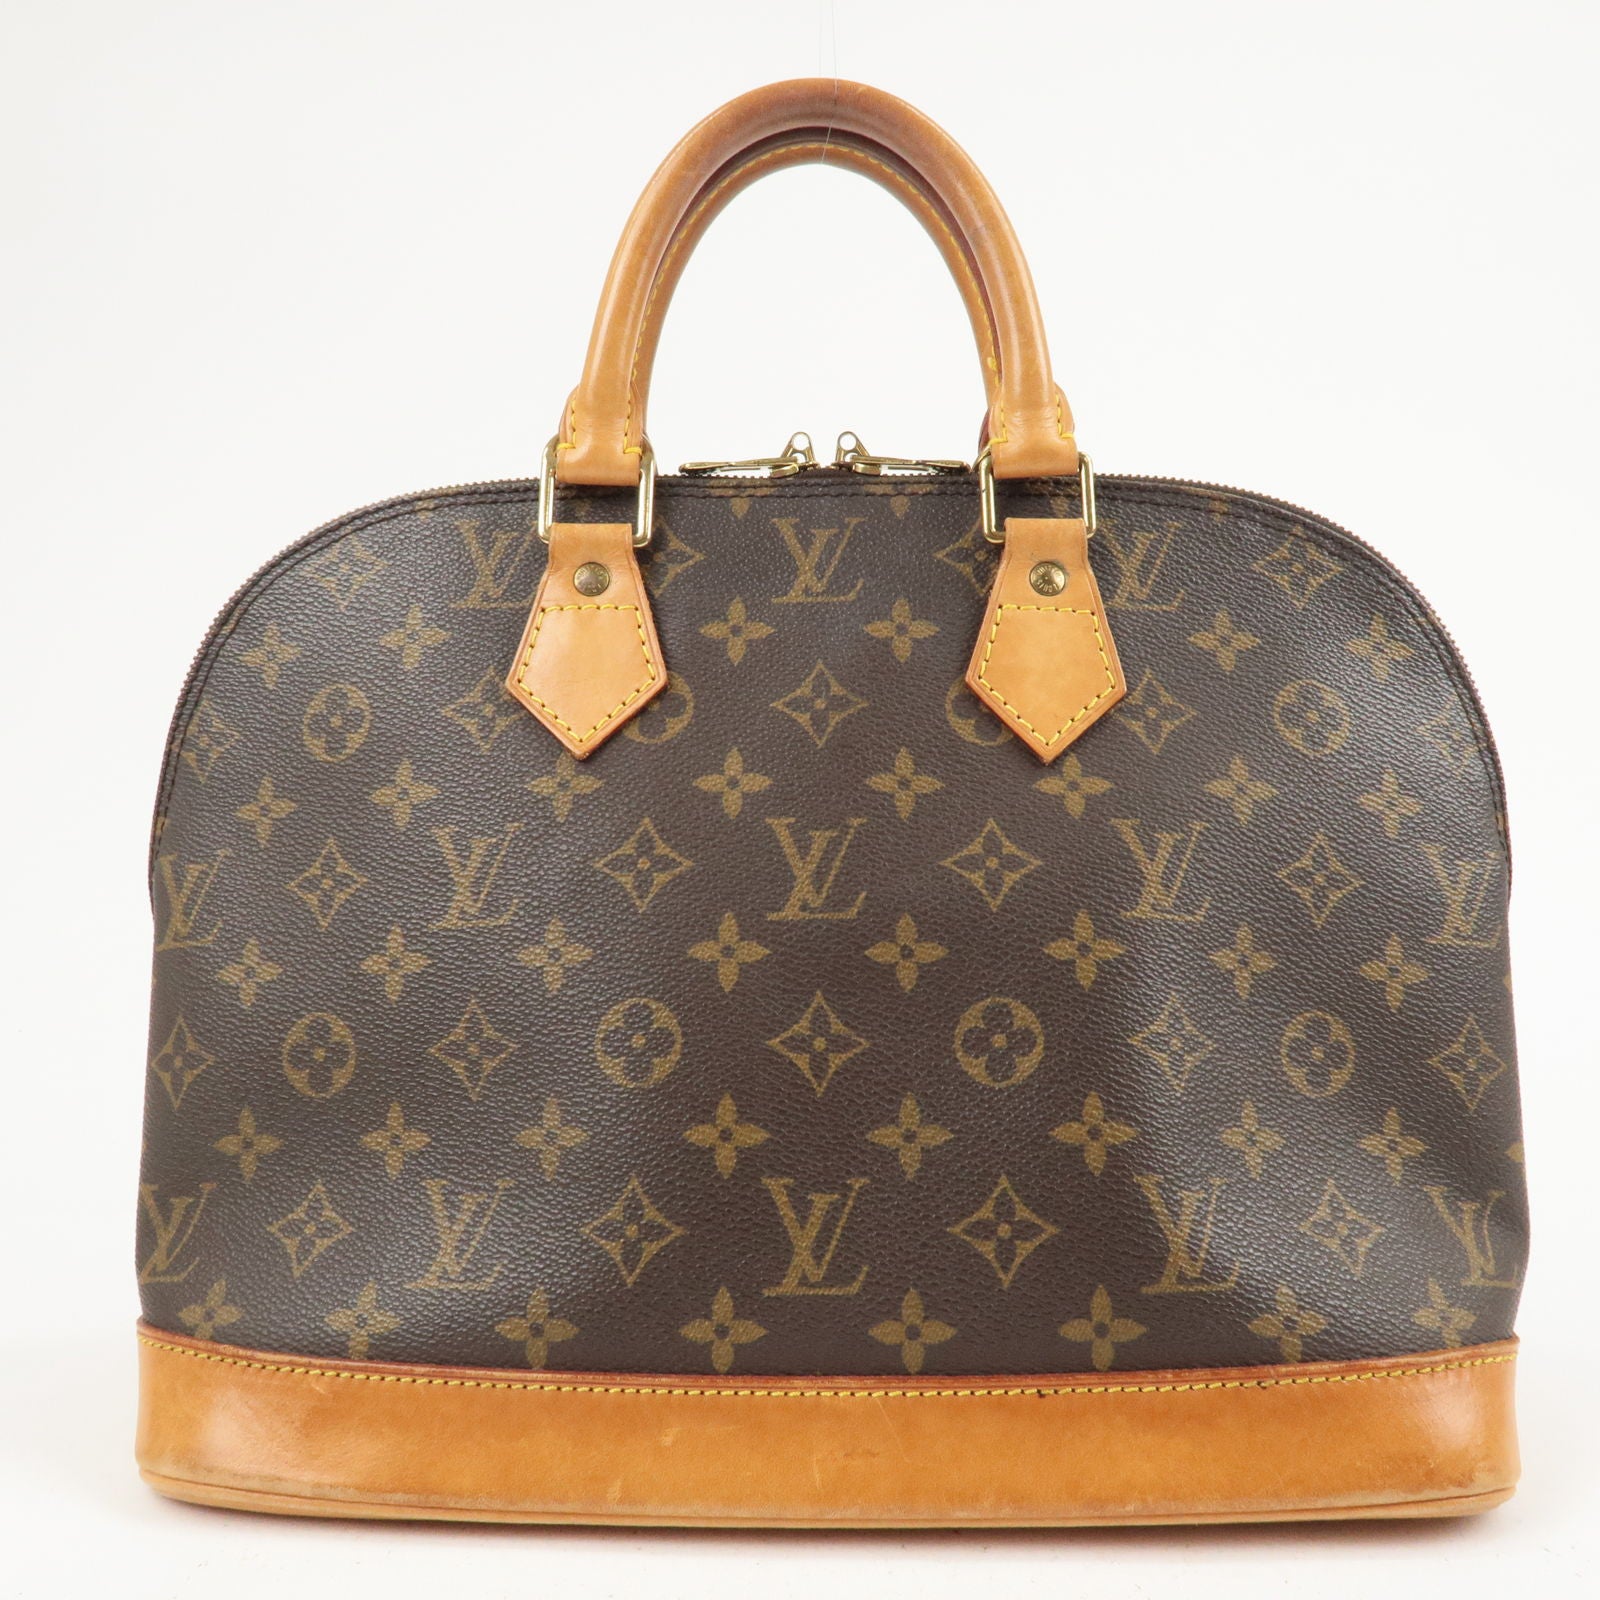 Louis Vuitton Keepall Bandouliere Bag Limited Edition Patchwork